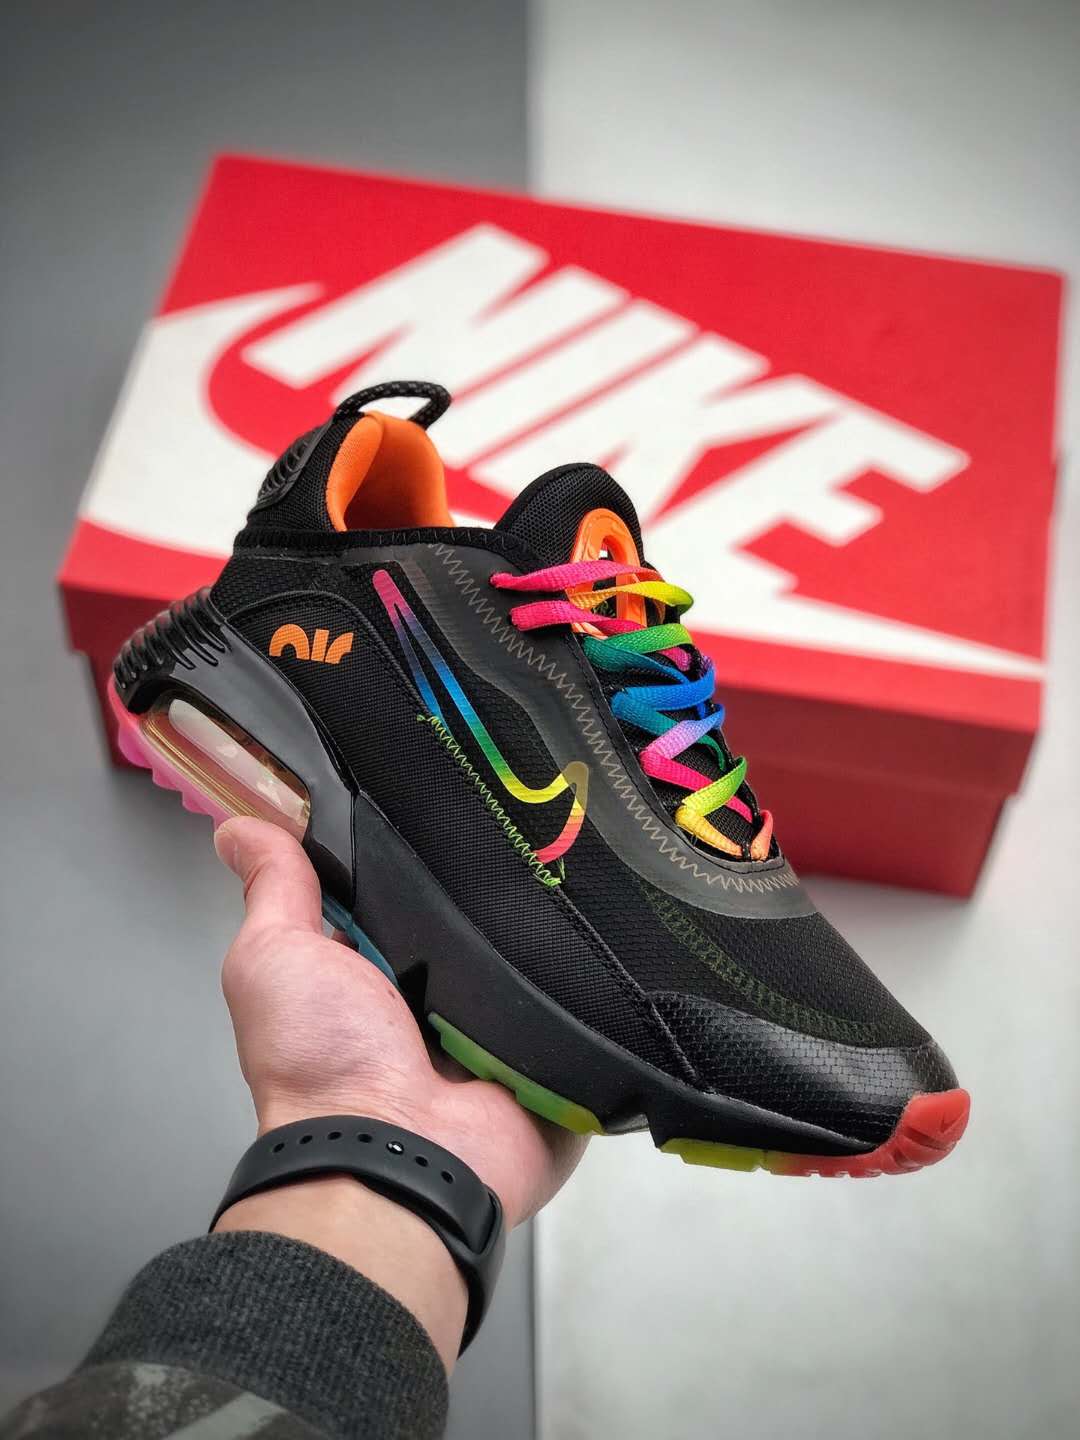 Nike Air Max 2090 Black Multi Color CT7695-009 - Stylish and Versatile Footwear for Every Occasion